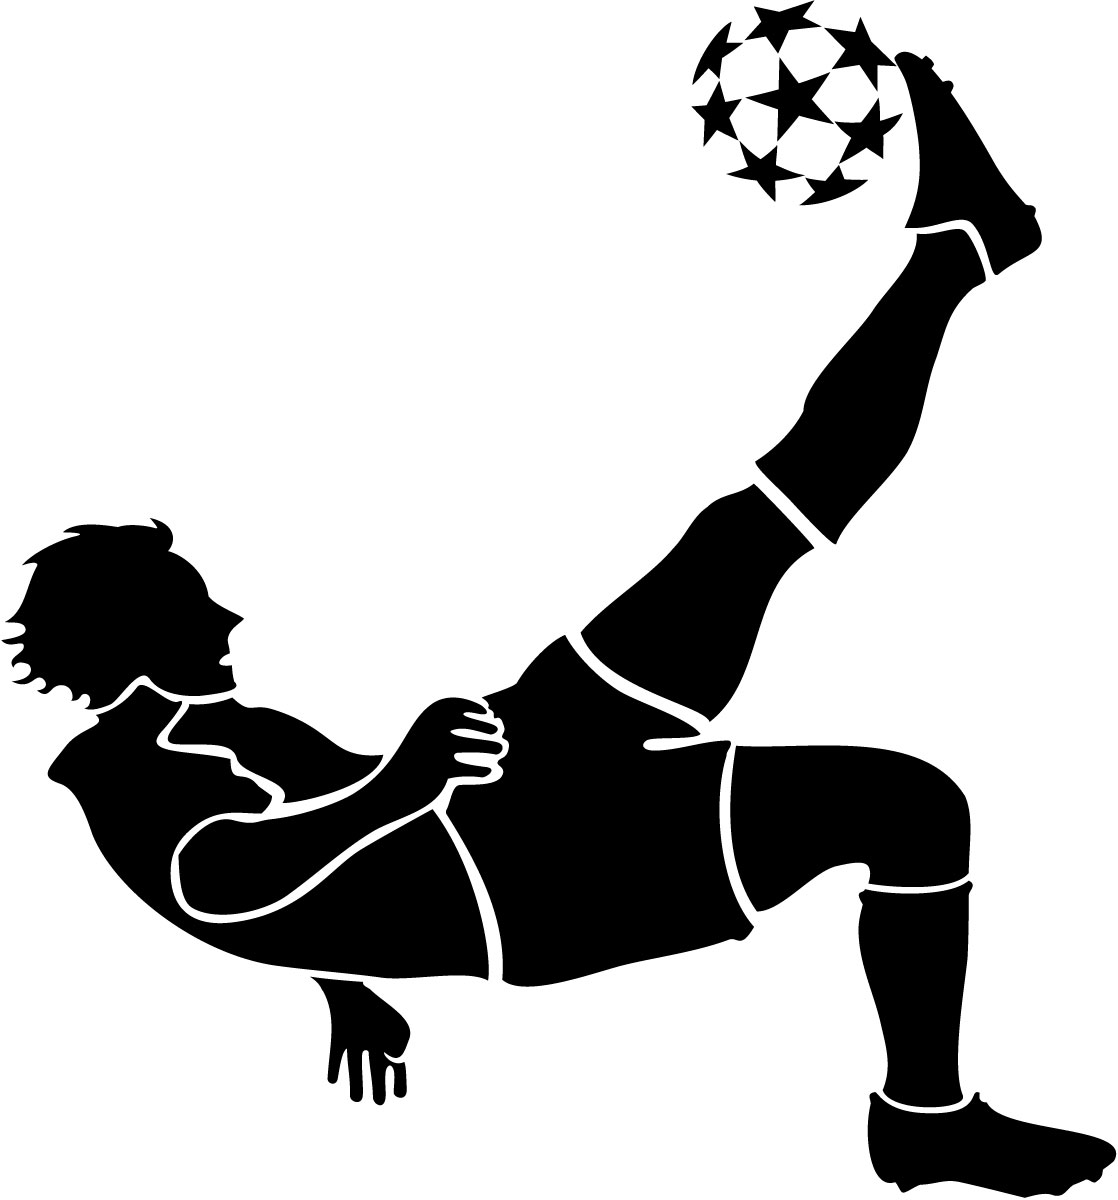 Awesome soccer ball clipart free last added clip art search for 2